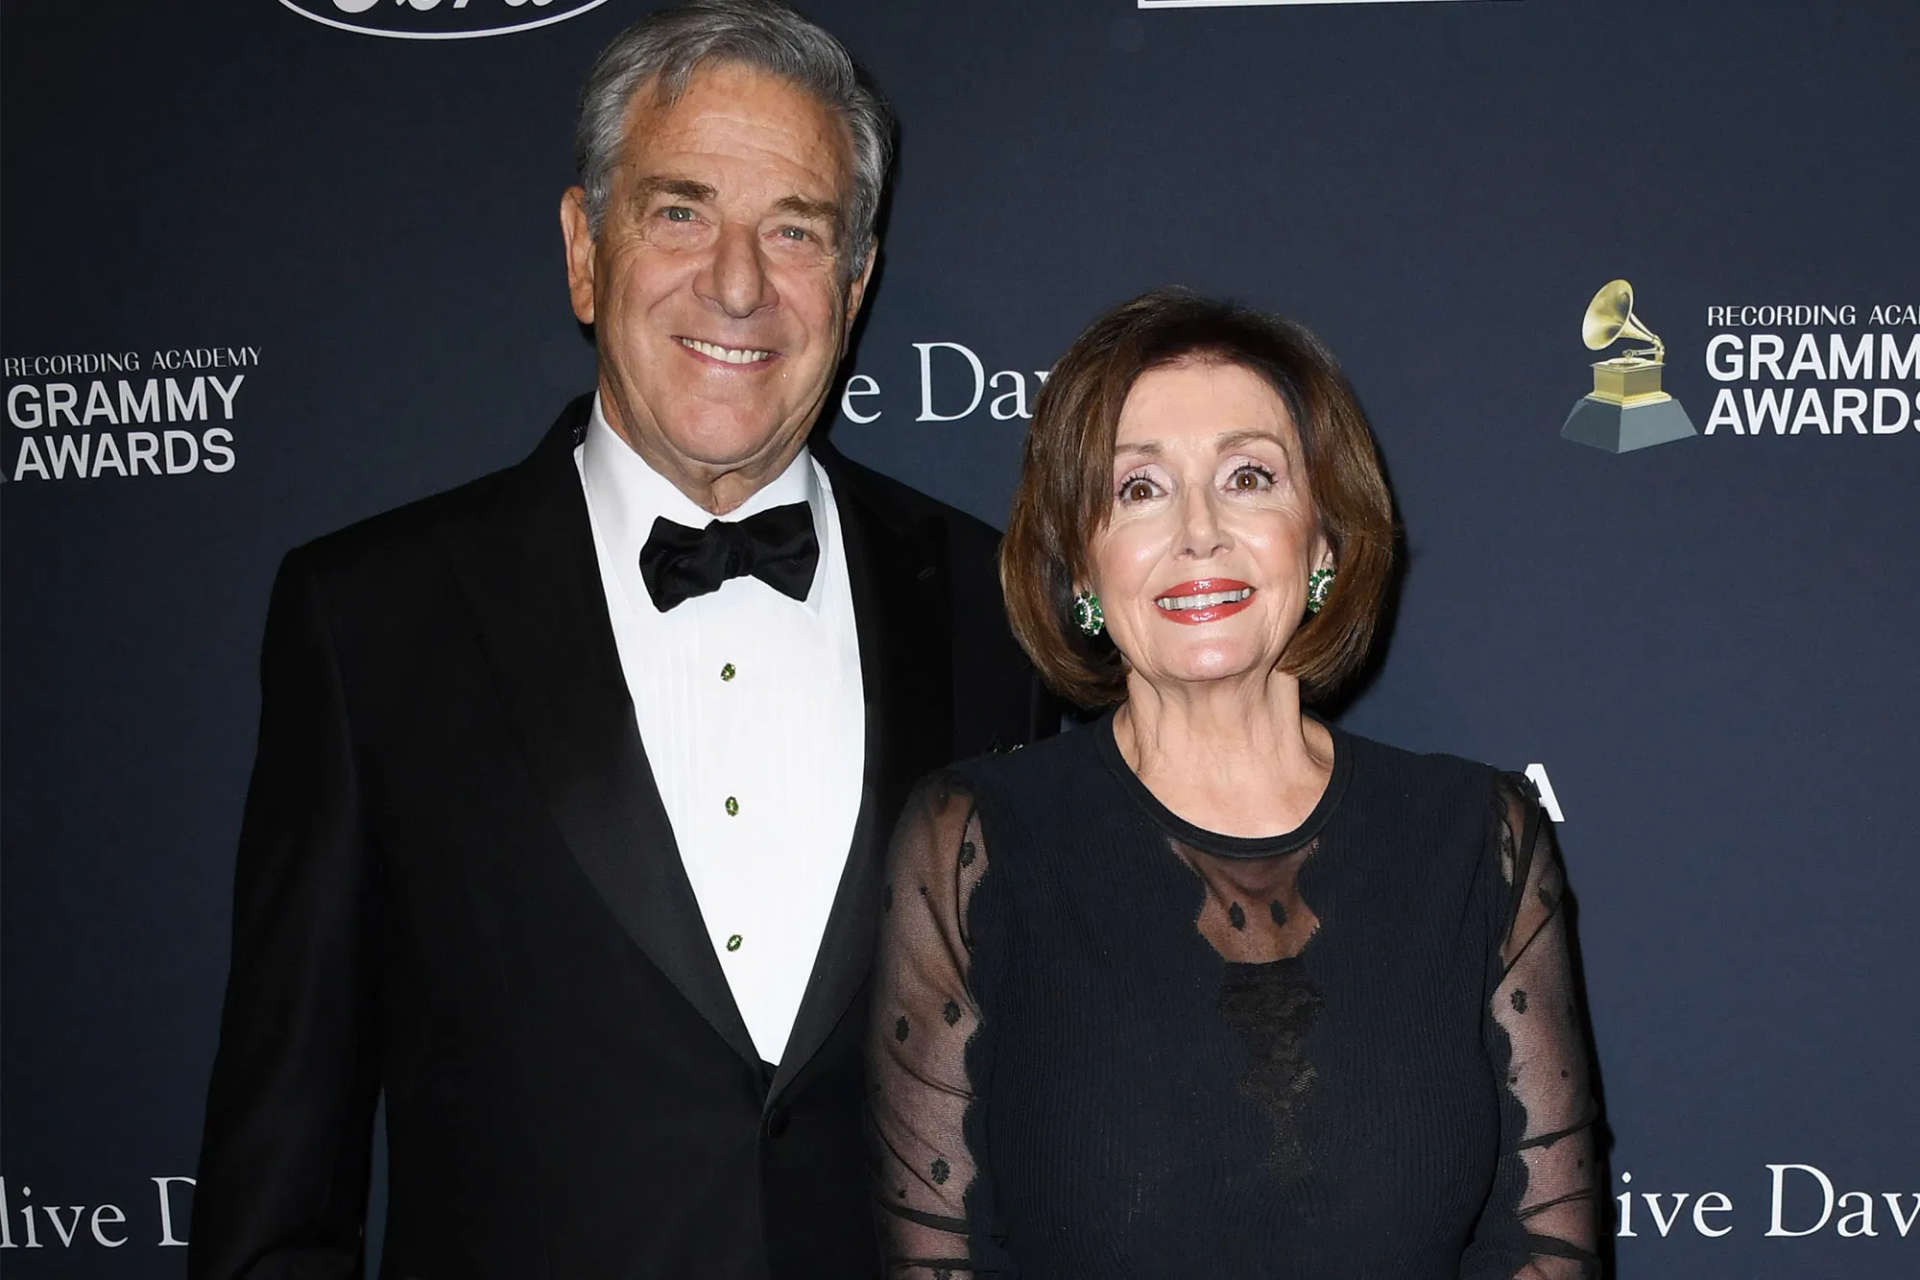 Who is Paul Pelosi: Biography, Personal Life, Career and Net Worth